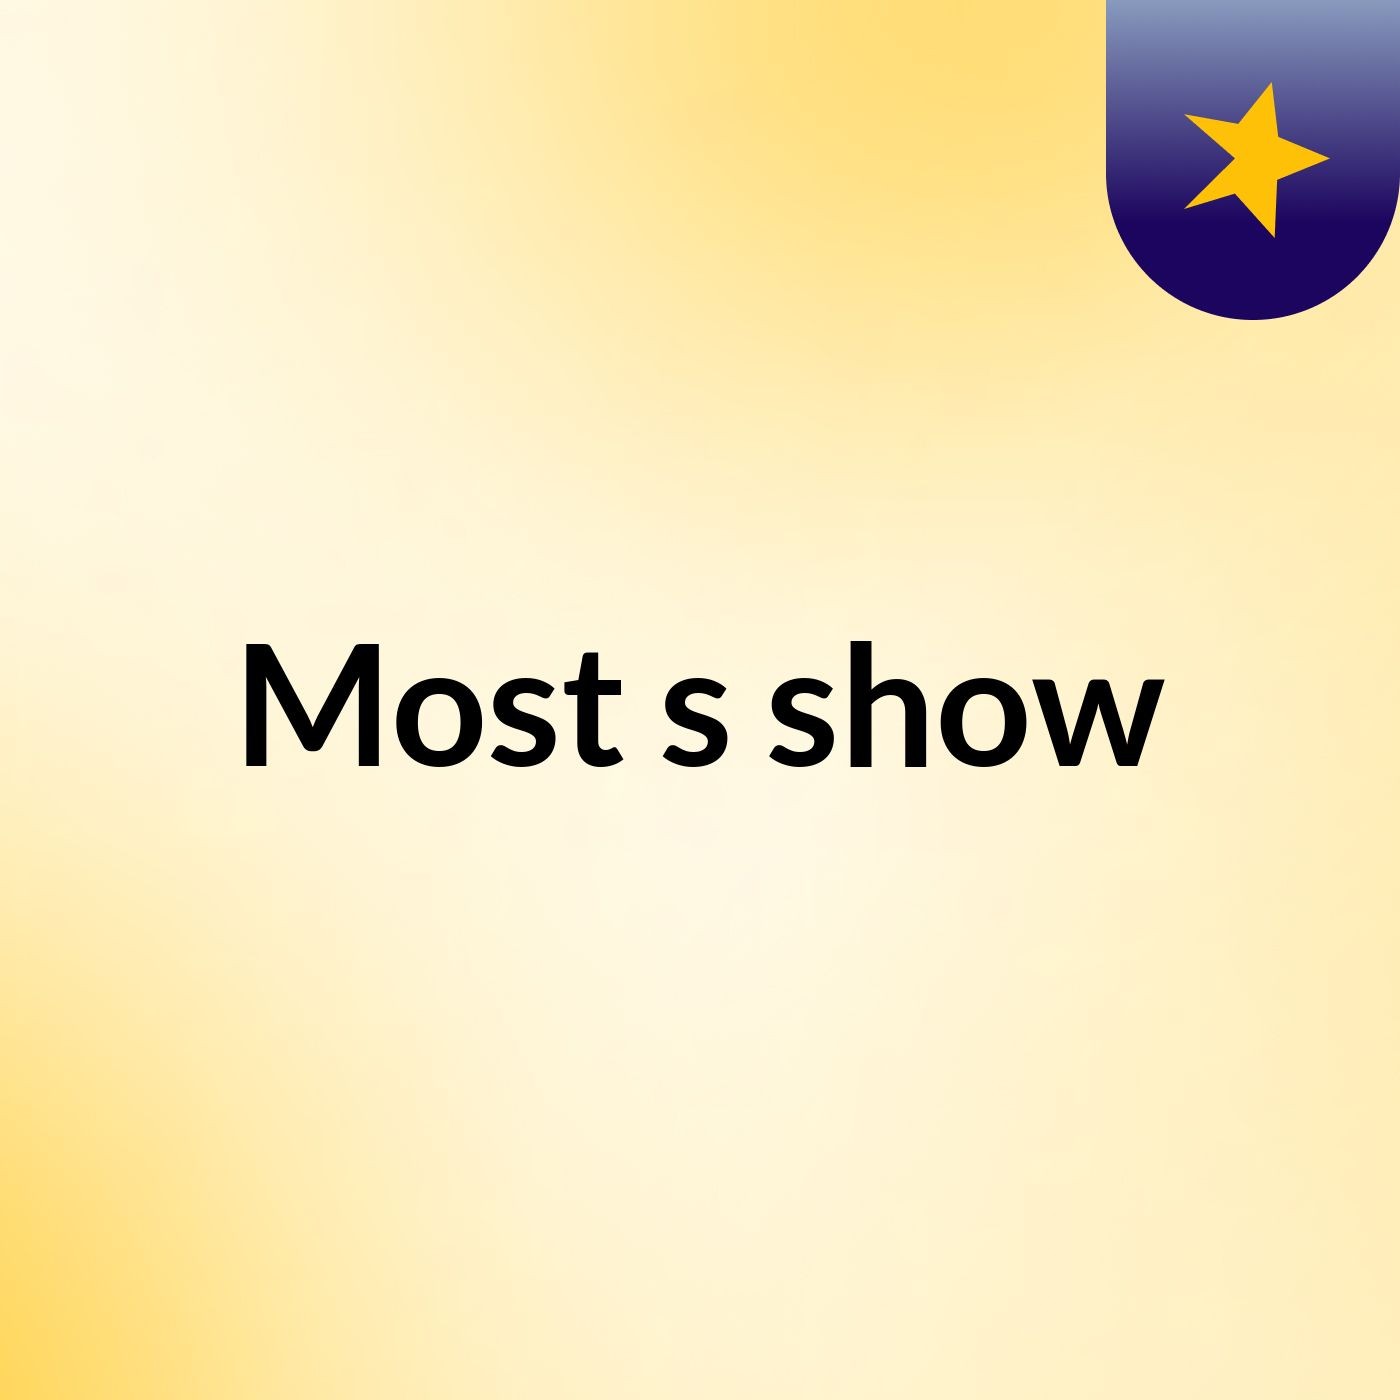 Most's show